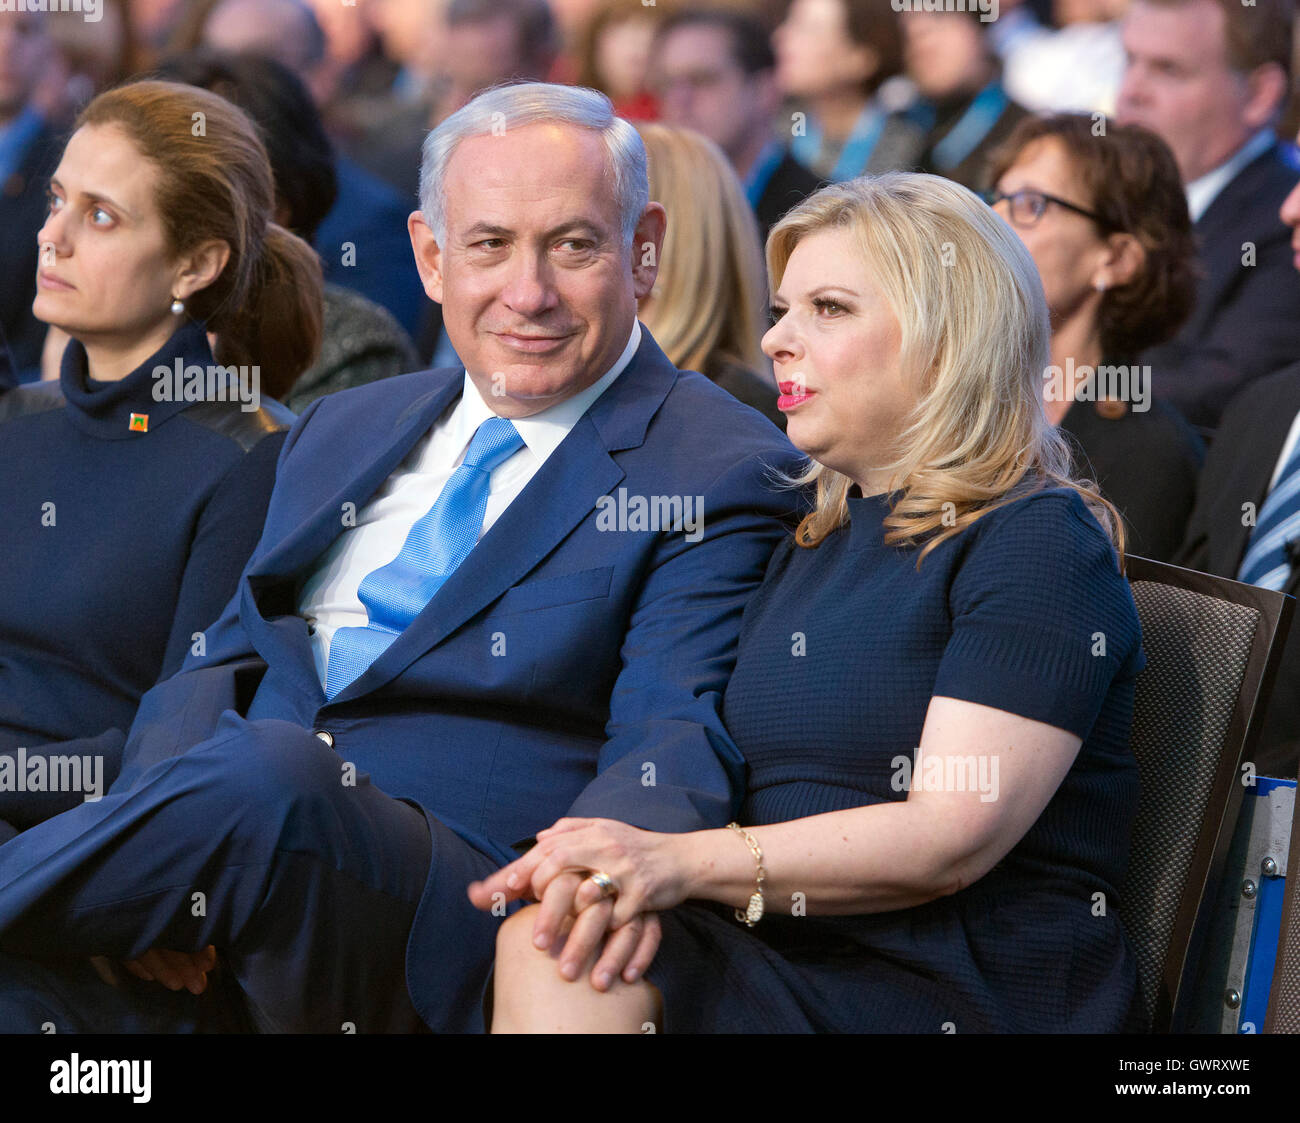 Prime Minister Benjamin Netanyahu of Israel and his wife, Sara, in the front row prior to his addressing the 2015 Jewish Federations of North America General Assembly at the Washington Hilton Hotel in Washington, DC on Tuesday, November 10, 2015. Credit: Stock Photo